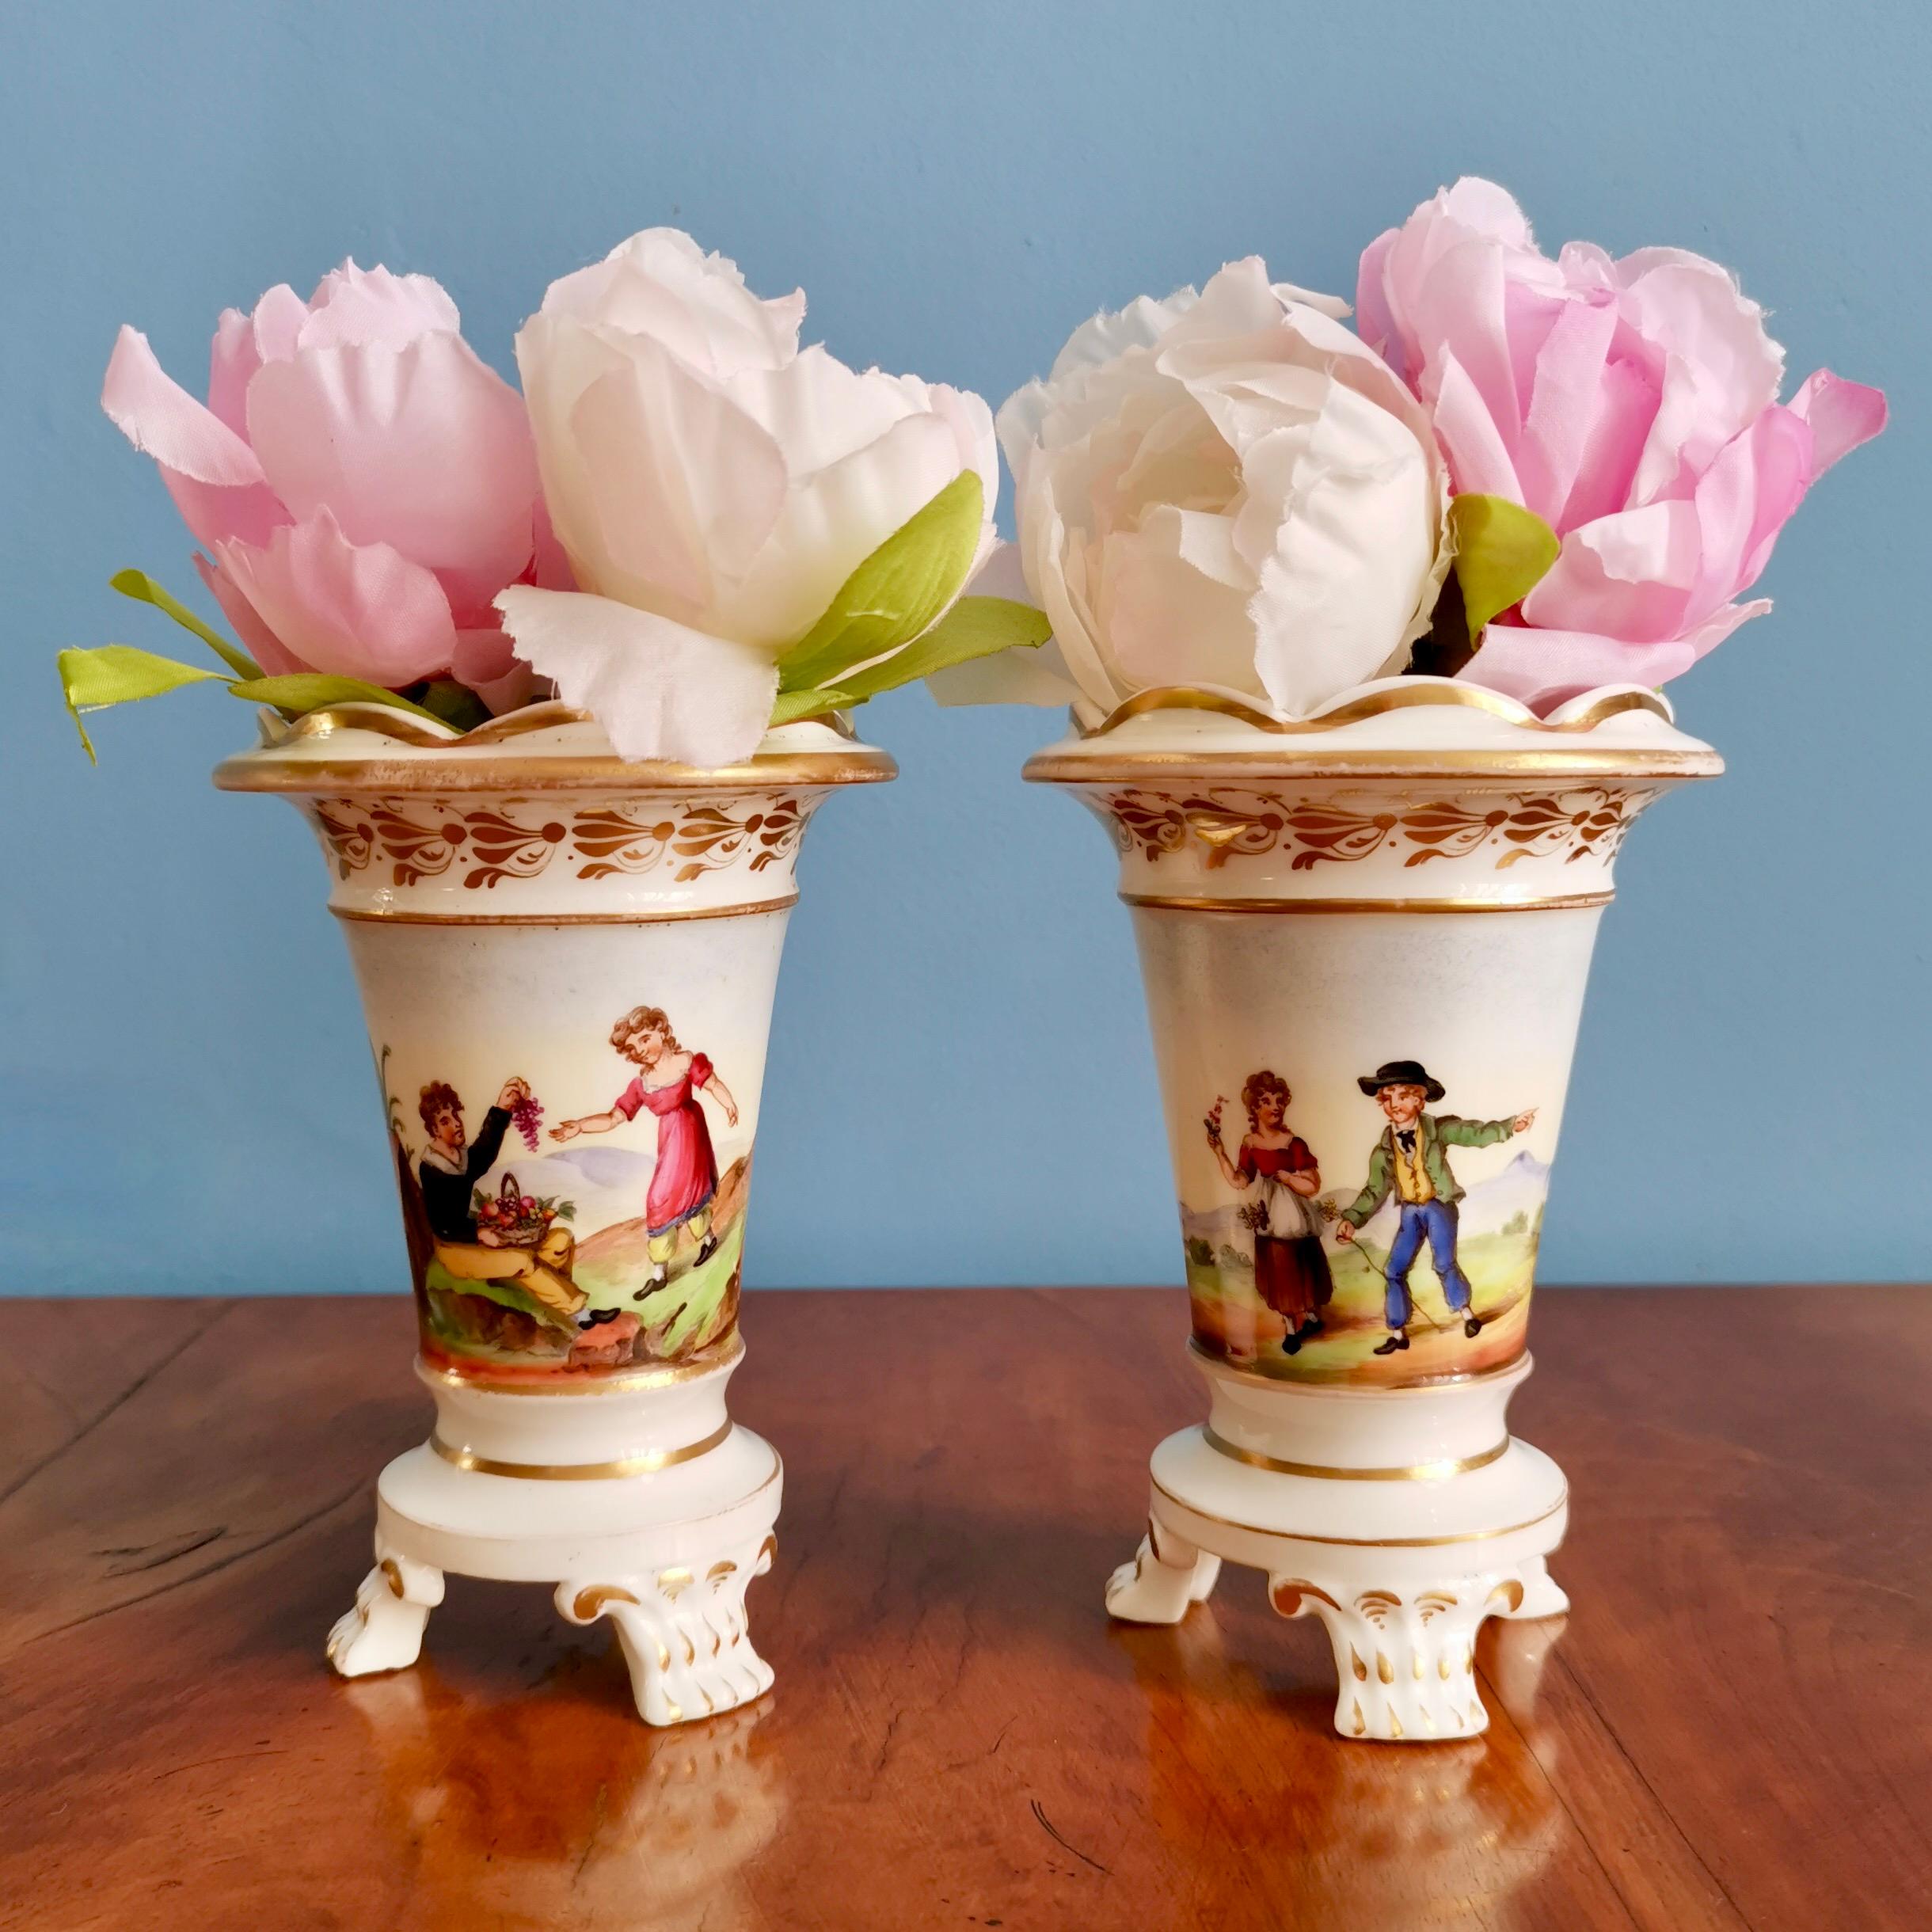 This is a super charming pair of spill vases made by an unknown Staffordshire maker in about 1820.

In the early 19th Century there were at some point about 300 potteries in Staffordshire, which at the time was one of the biggest centres of